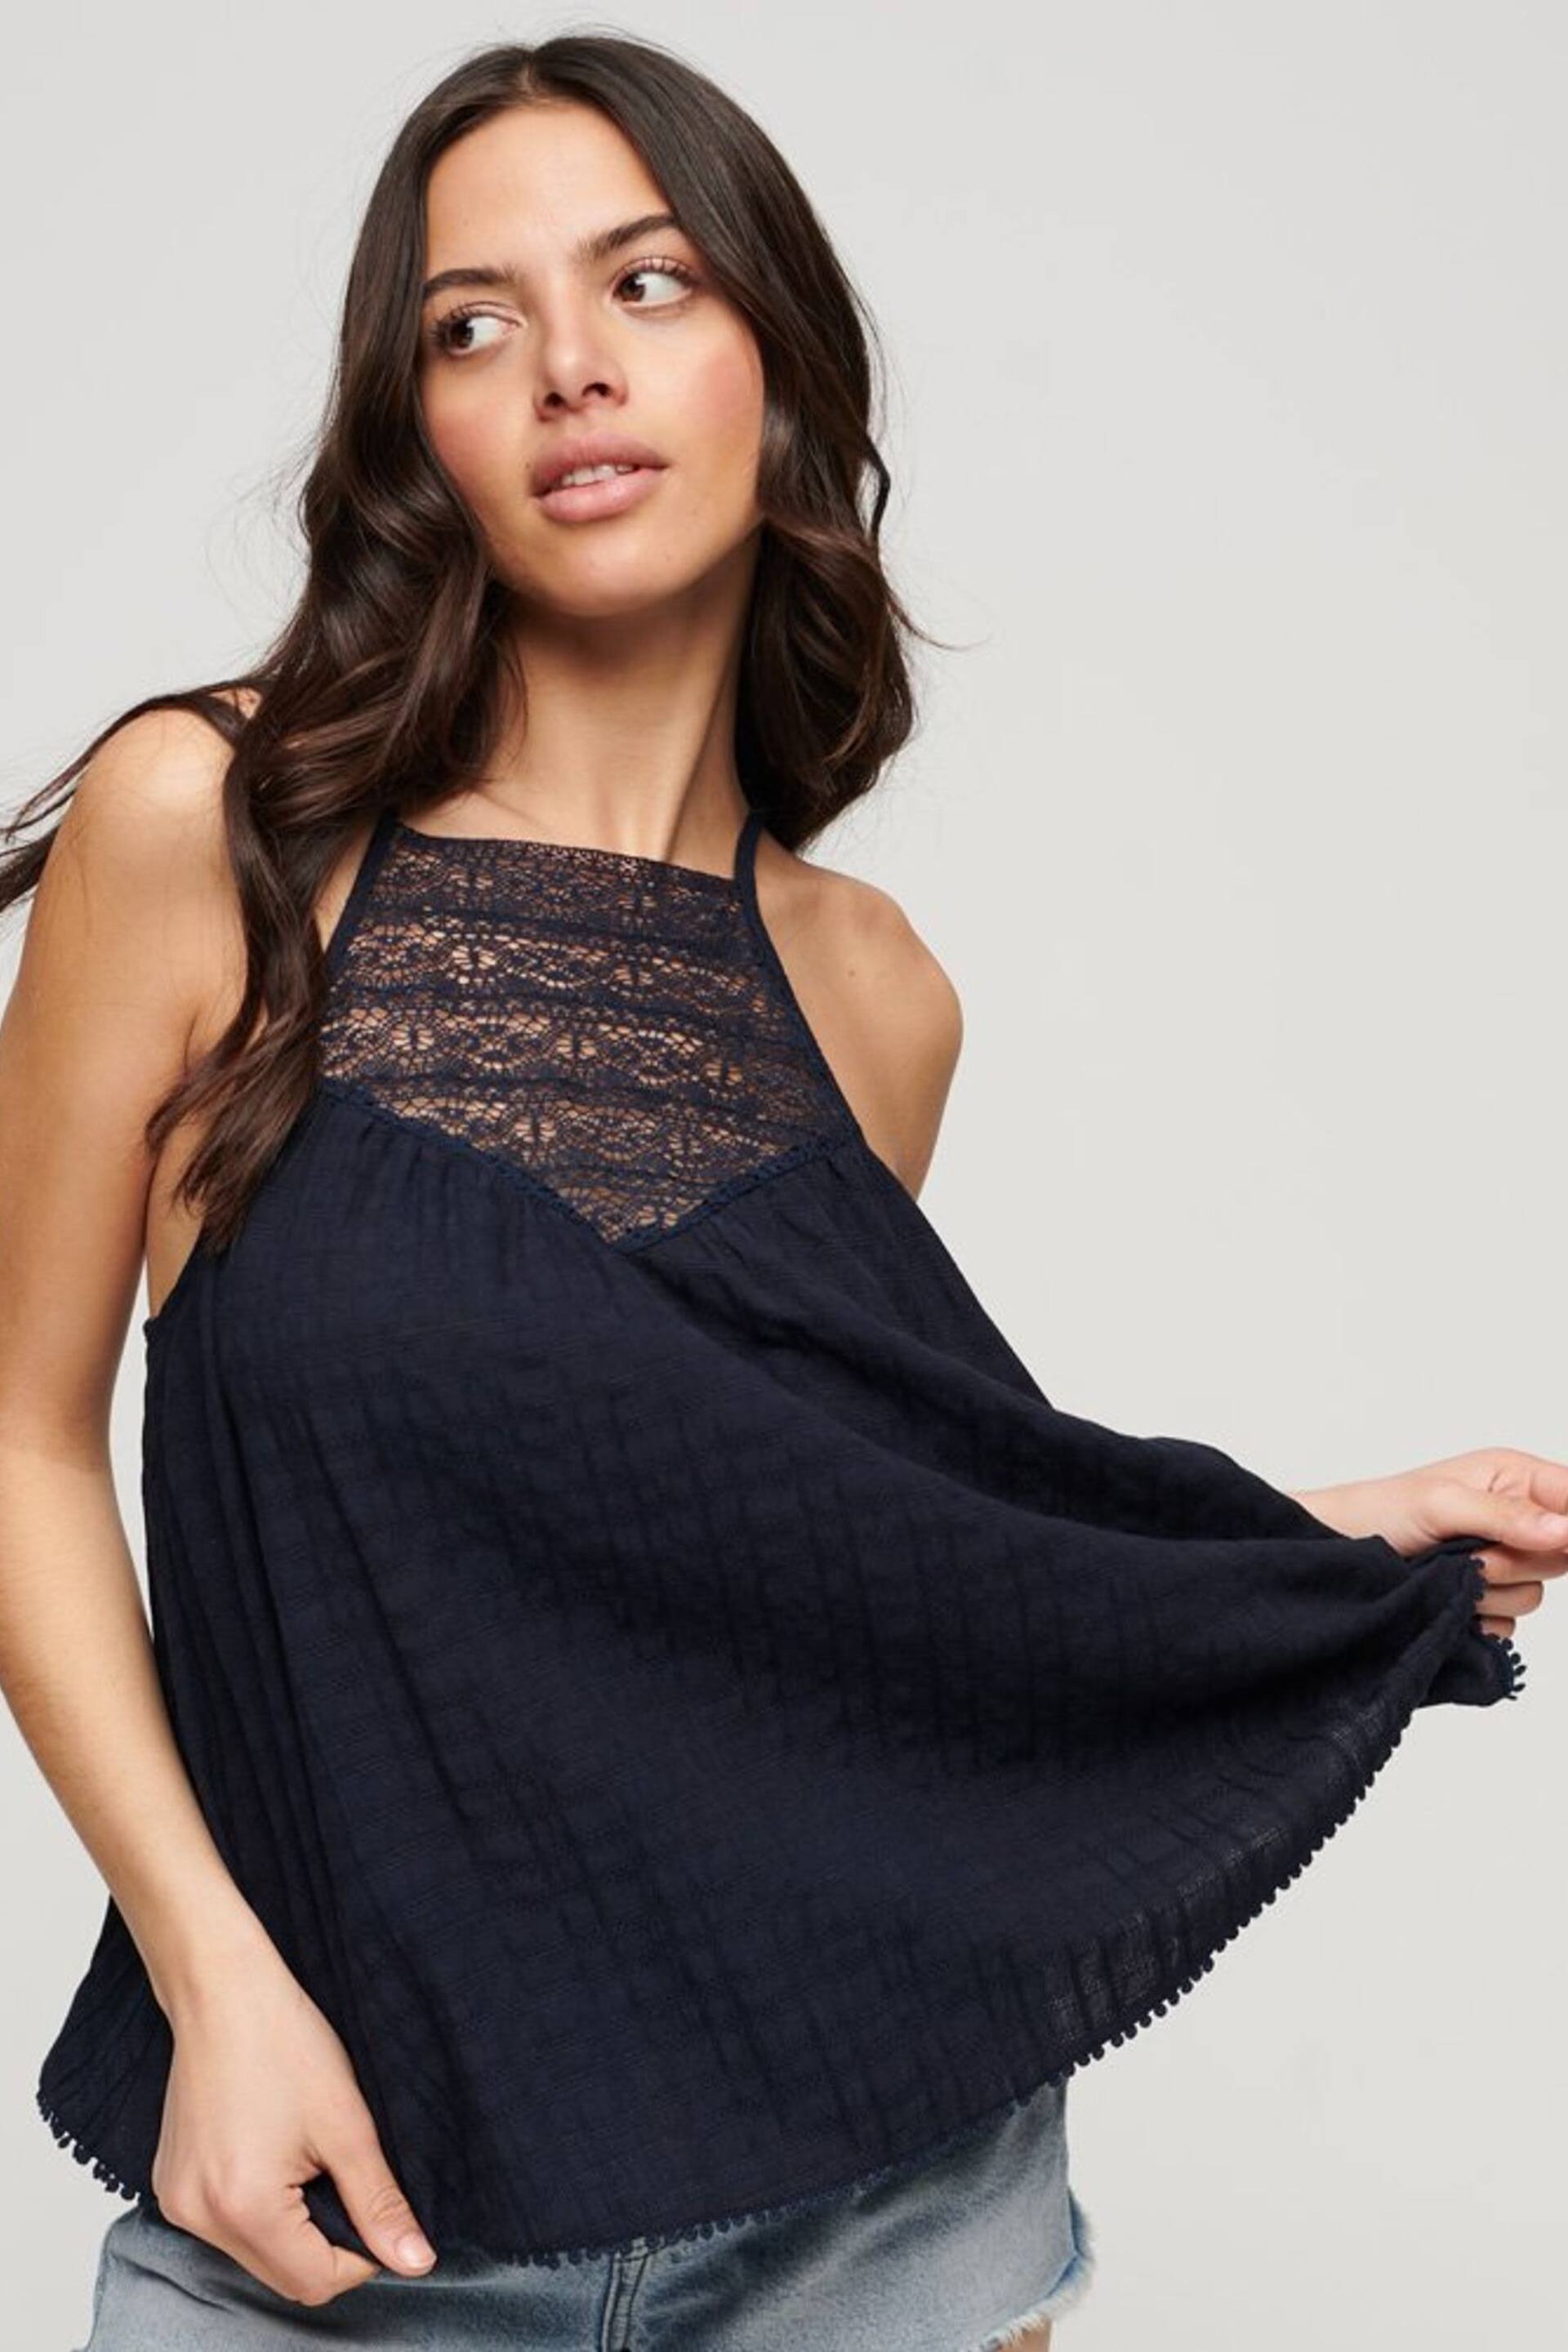 Superdry Blue Lace Cami Beach Top - Image 2 of 5